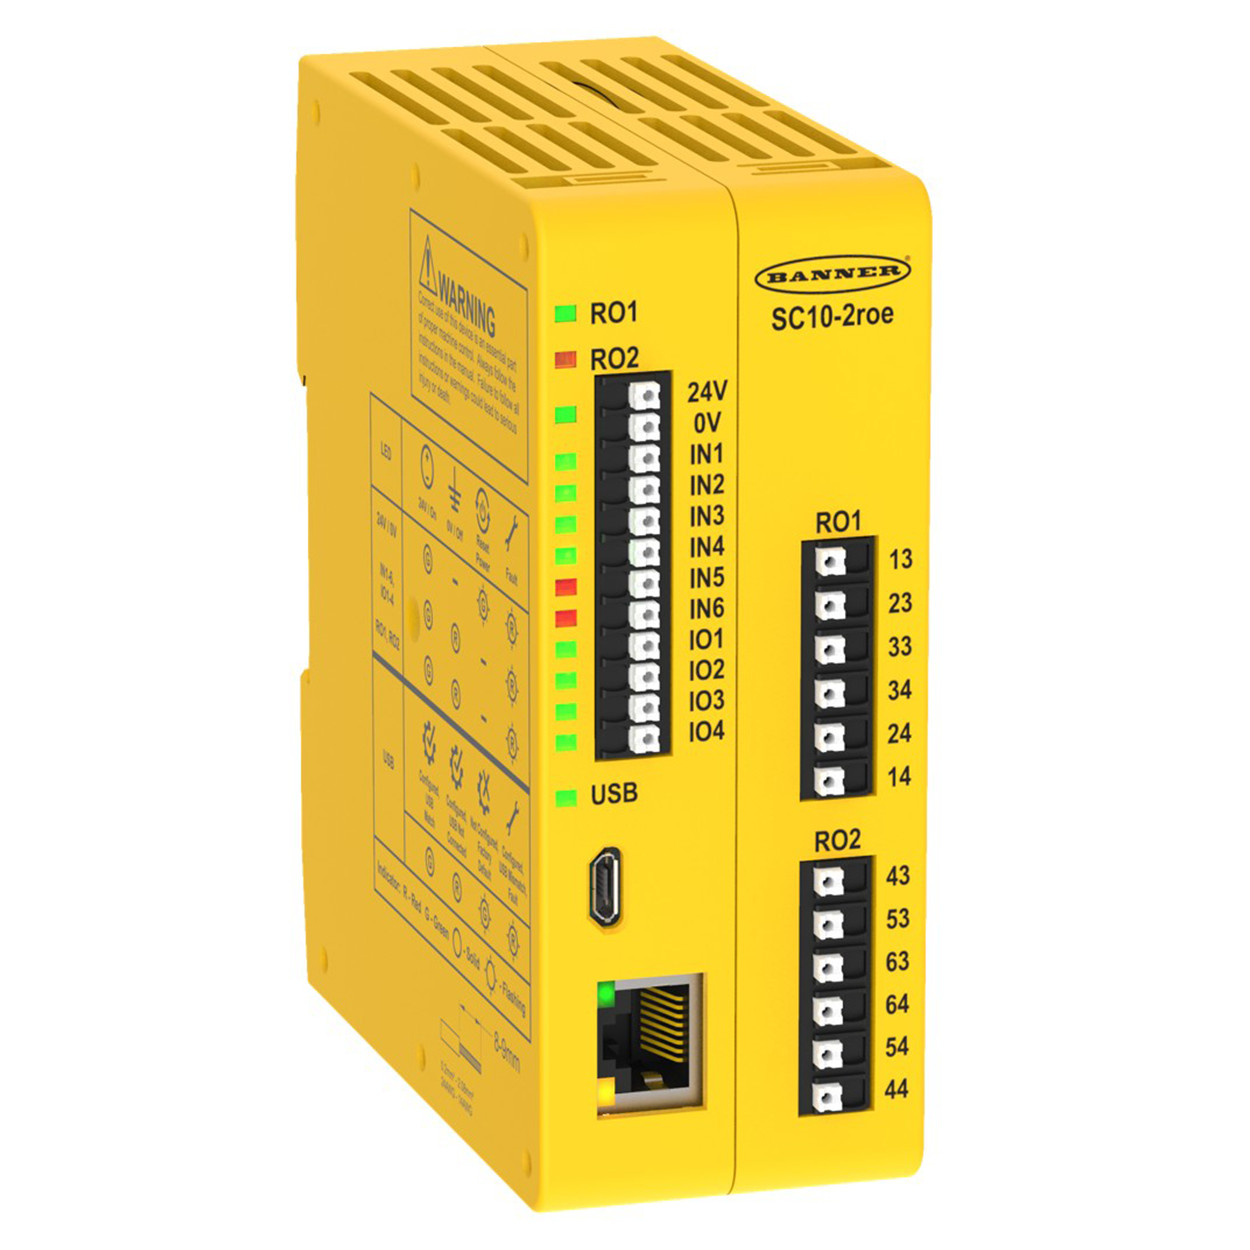 BANNER SC10 SERIES SAFETY CONTROLLER / RELAY HYBRID